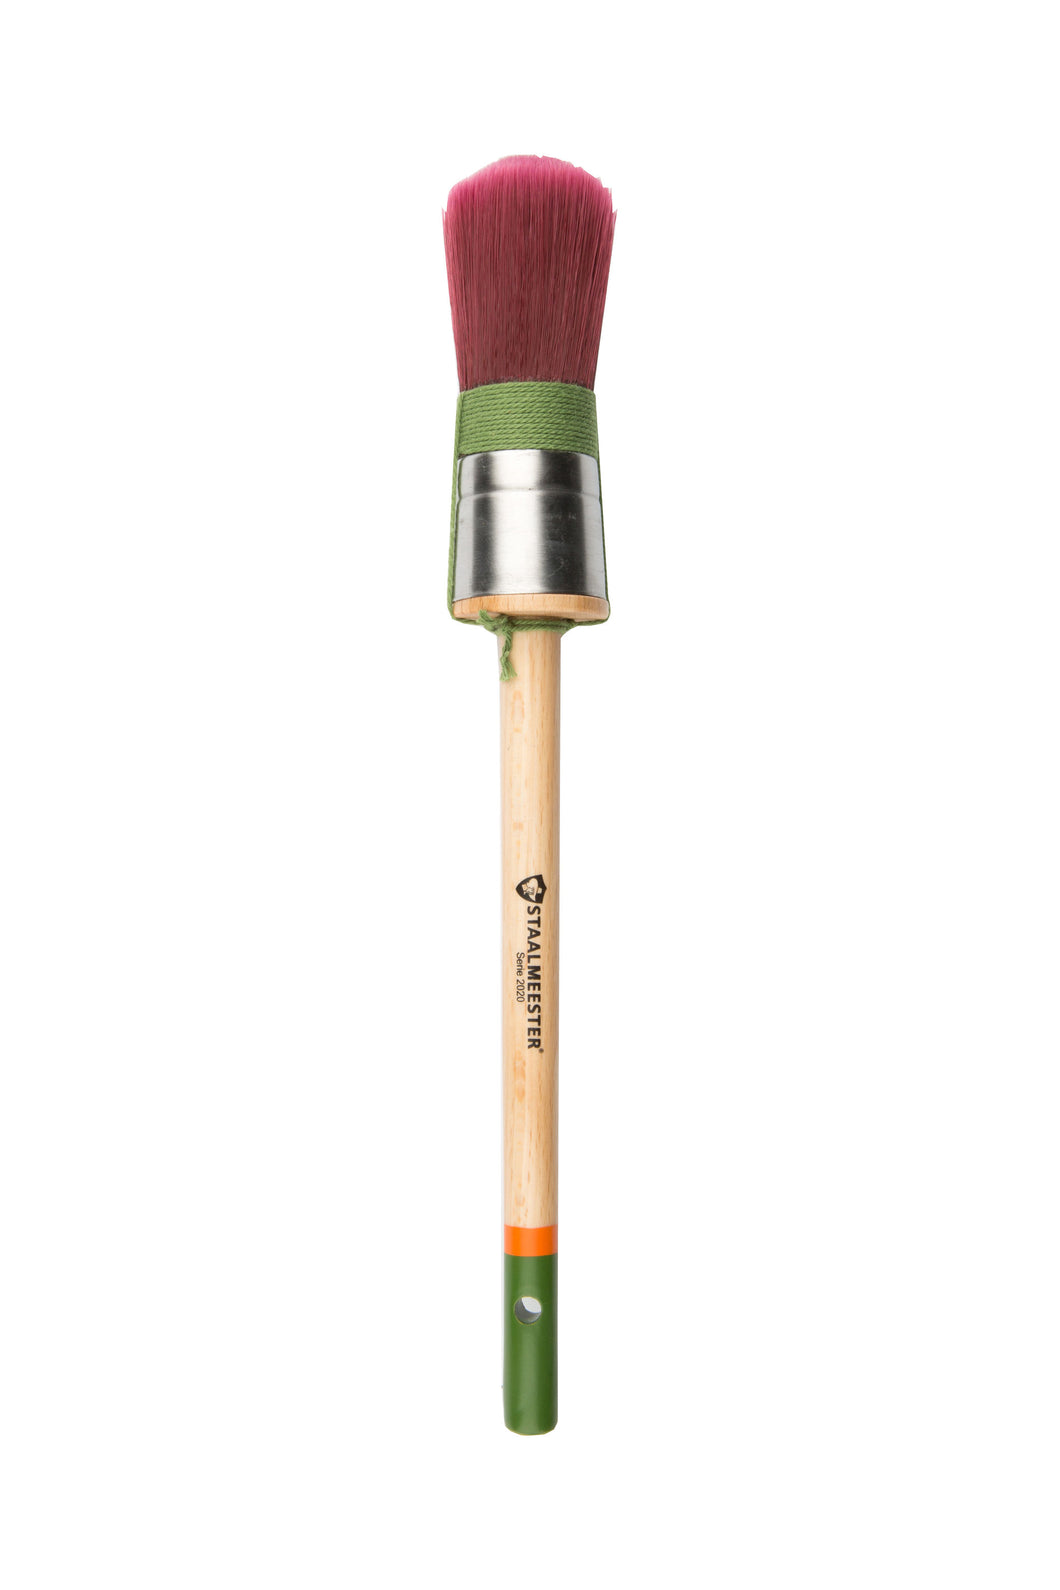 Staalmeester Round Synthetic #18 Brush